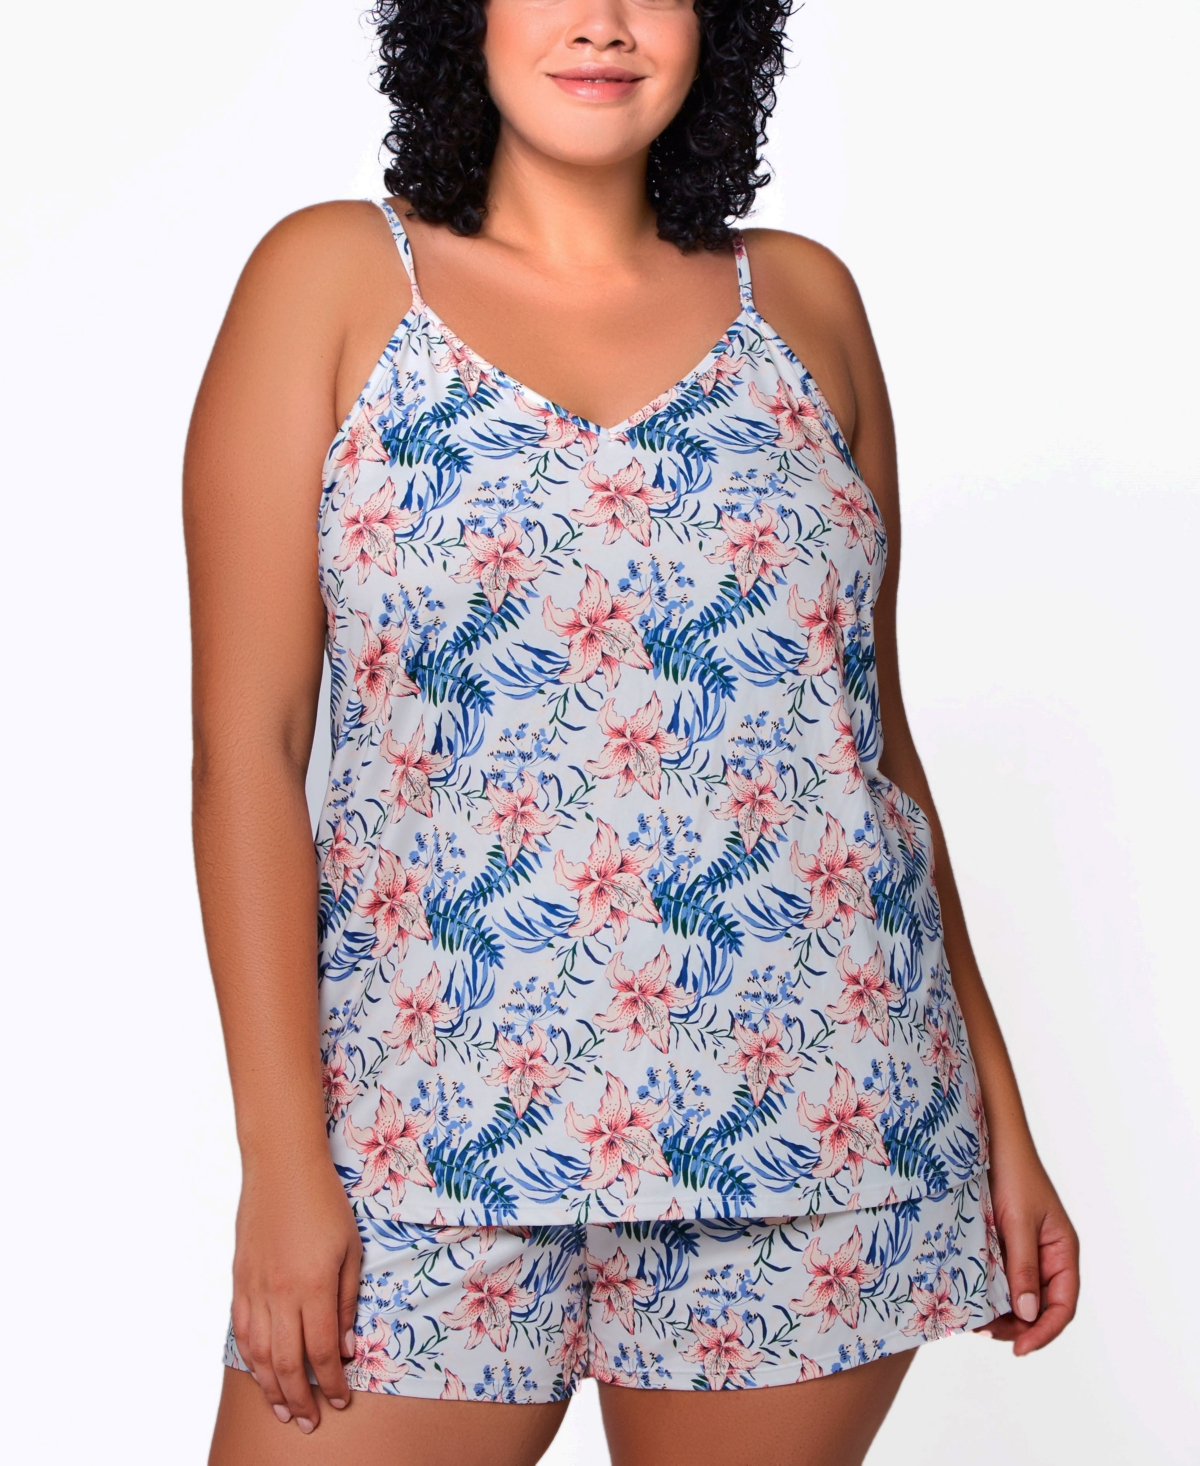 Icollection Plus Size 2pc. Recycled Light Weight Cami And Short Pajama Set In Cream